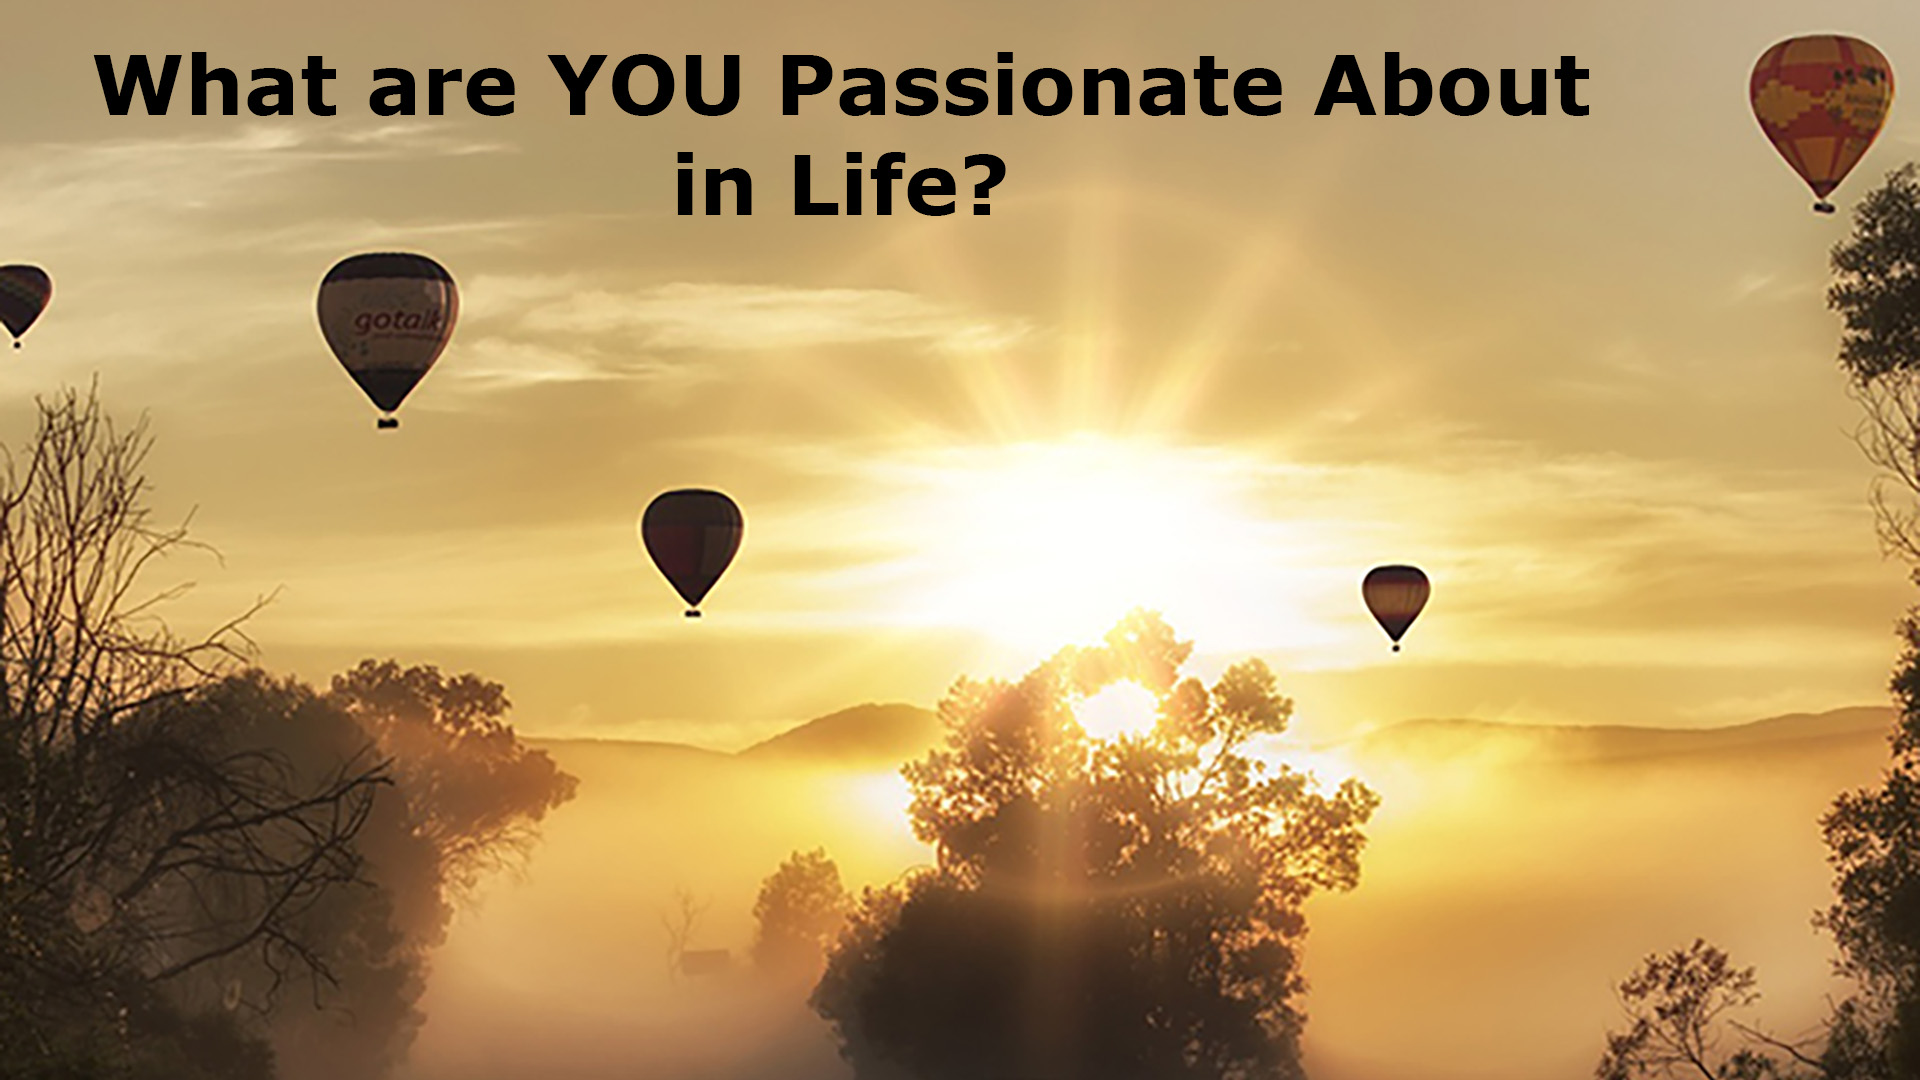 What are You Passionate About in Life